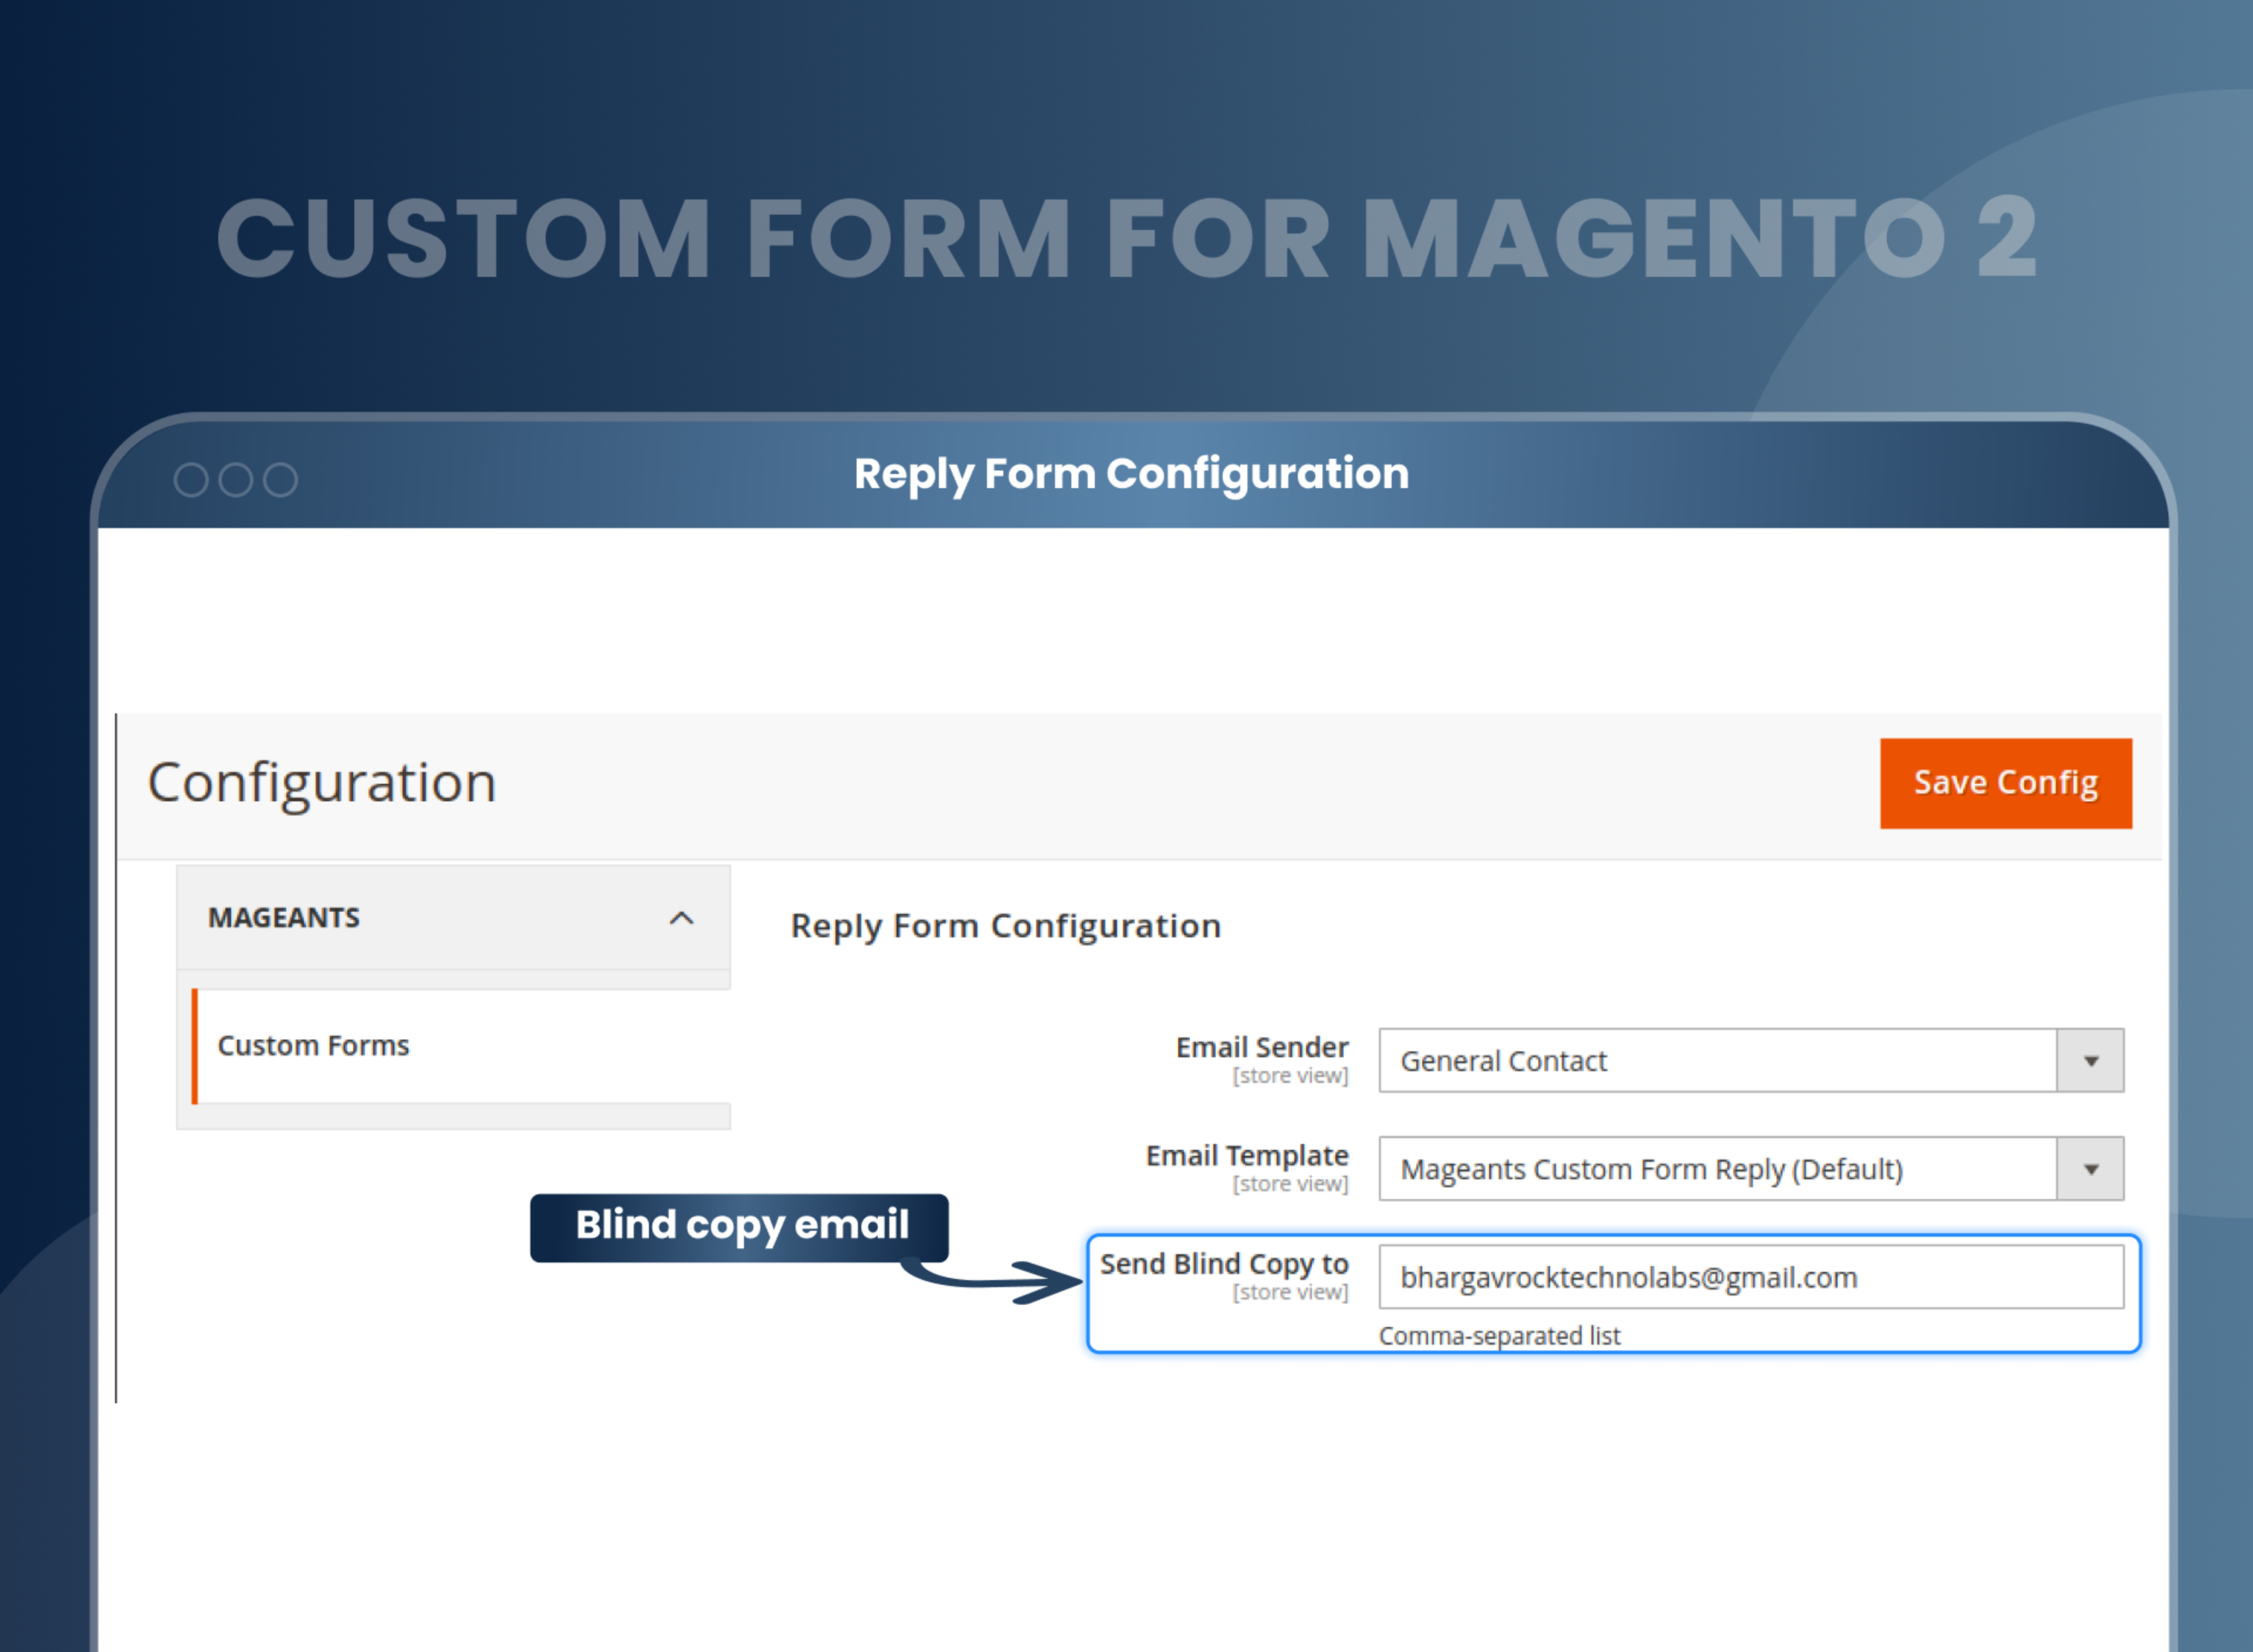 Reply Form Configuration